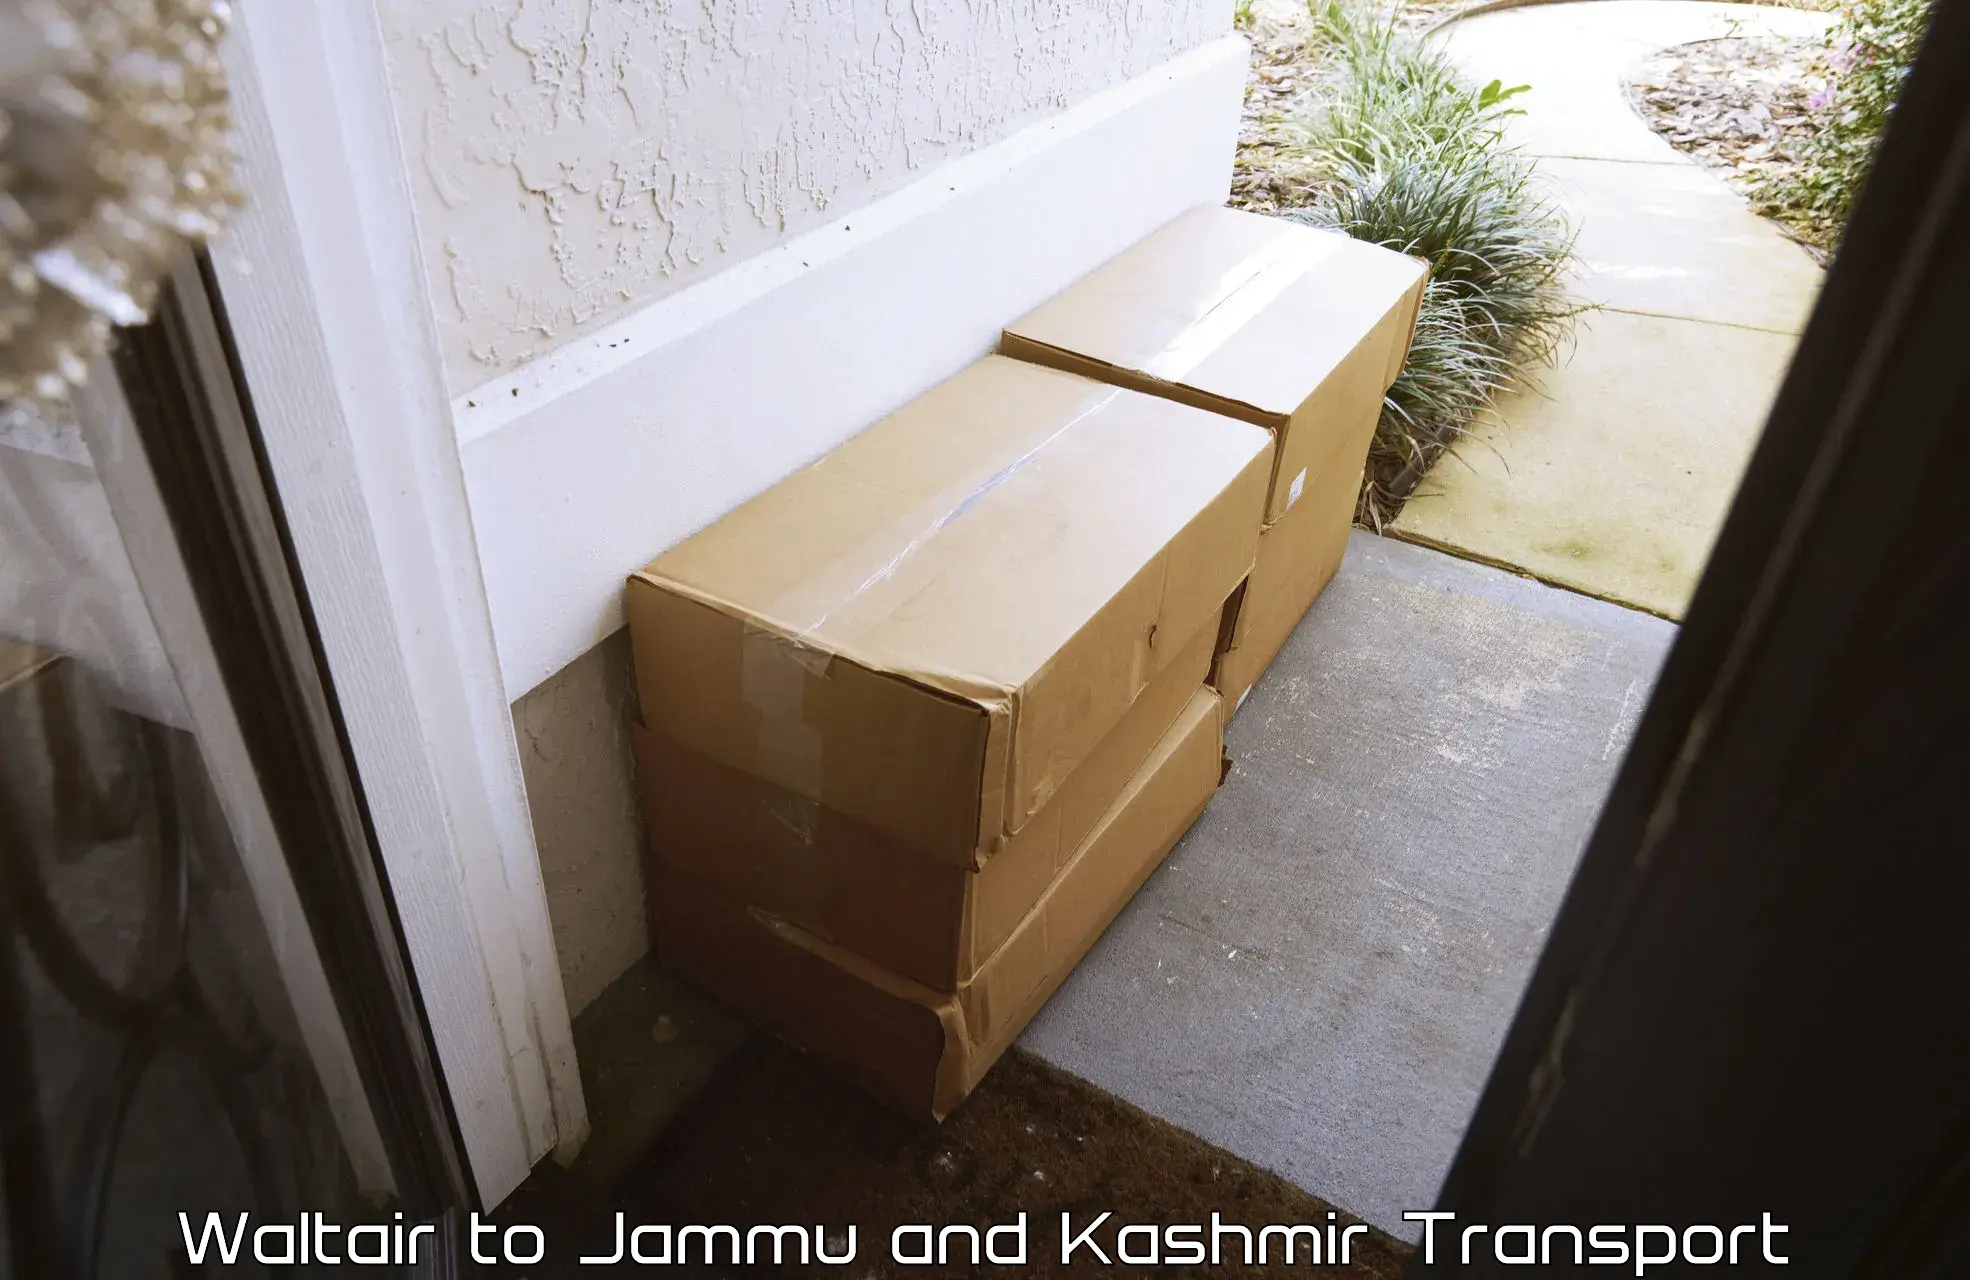 Daily parcel service transport in Waltair to Shopian